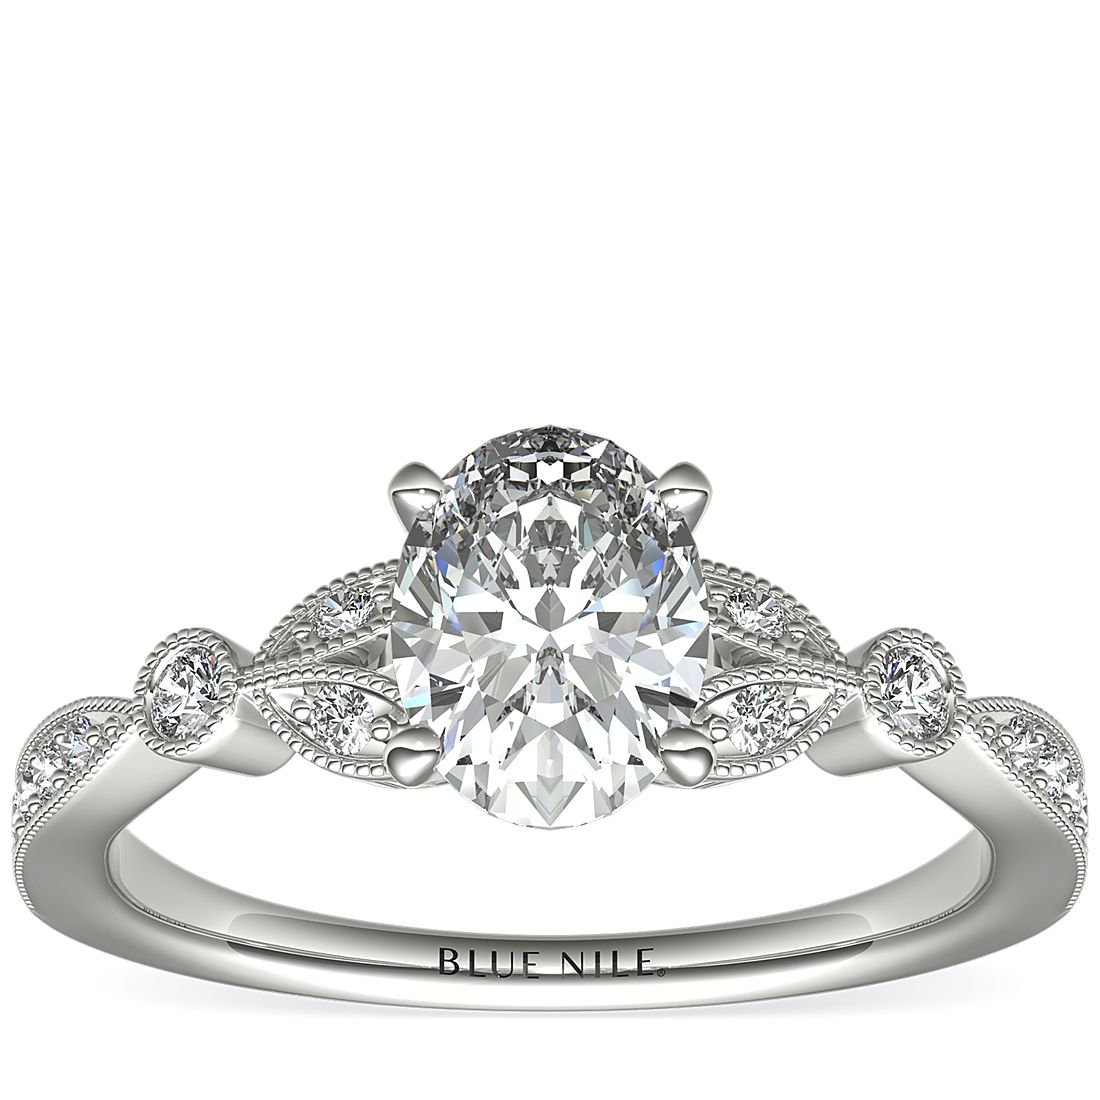 A vintage-inspired engagement ring with a 1-carat oval diamond surrounded by a milgrain edge.